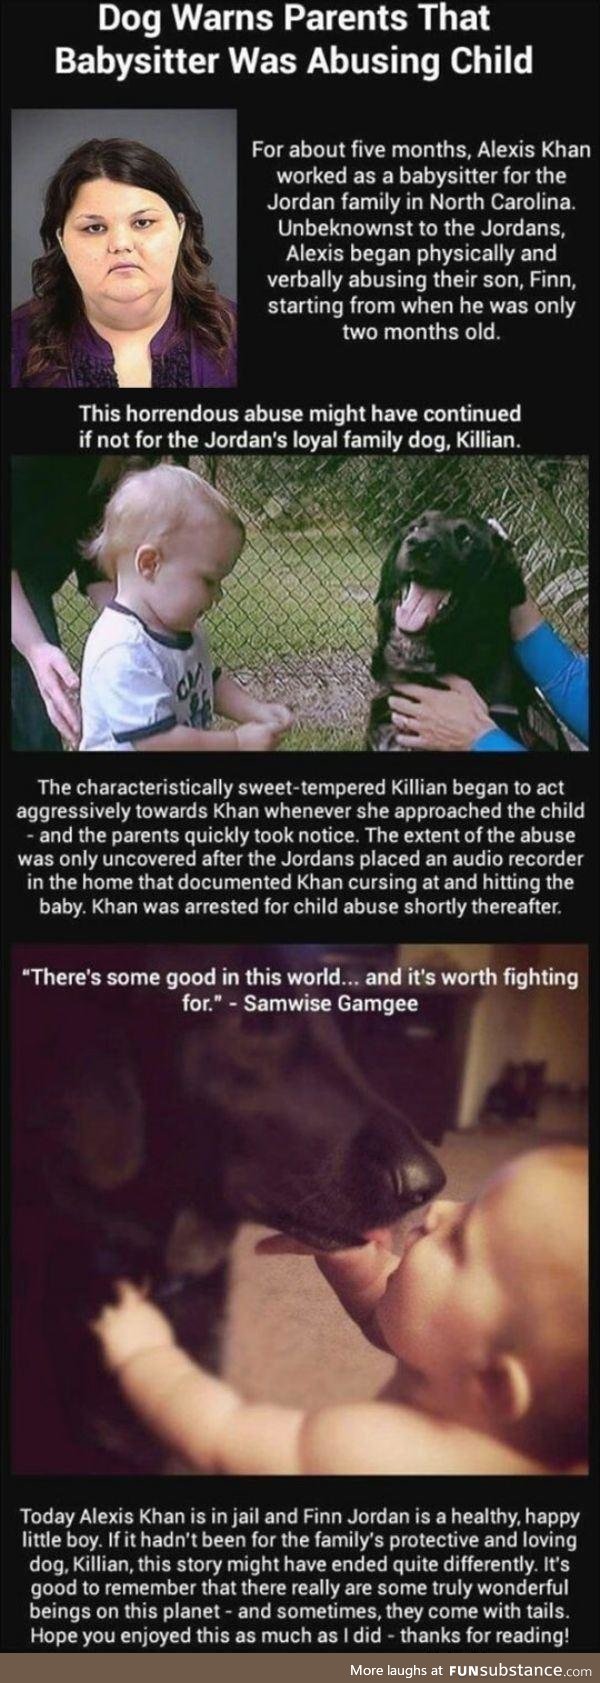 Dog saves baby from abuse